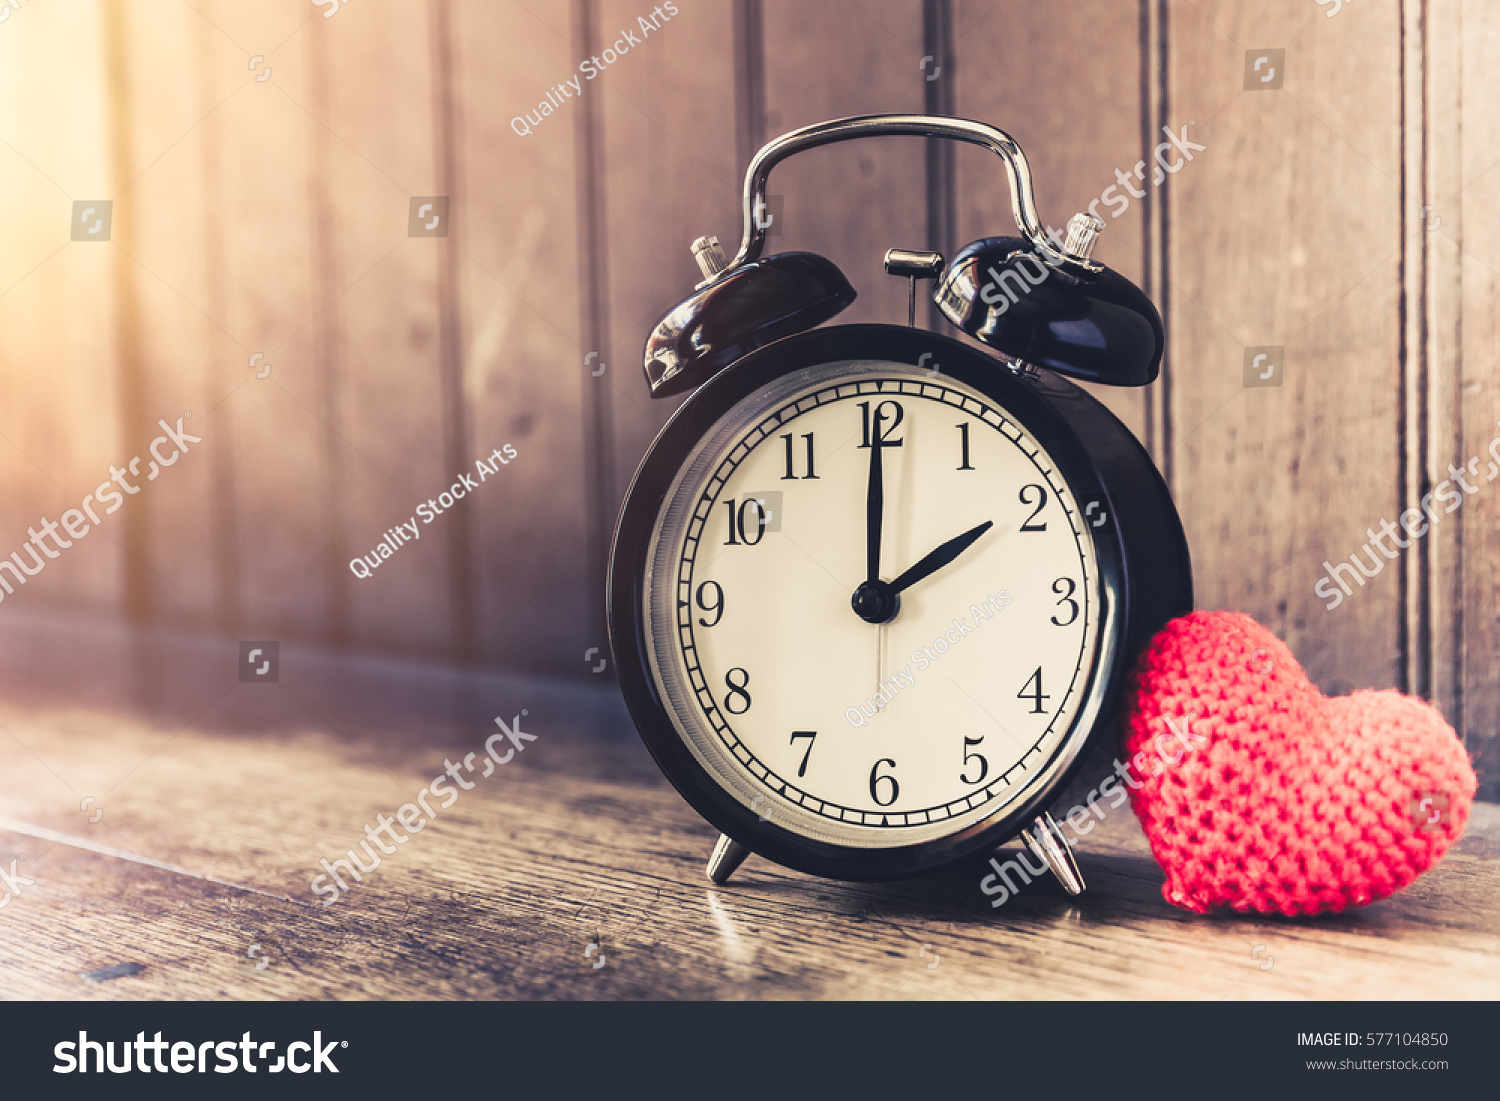 Love clock vintage tone timed 2 o'clock, Time of sweet loving past memories story on the old wood background. #577104850